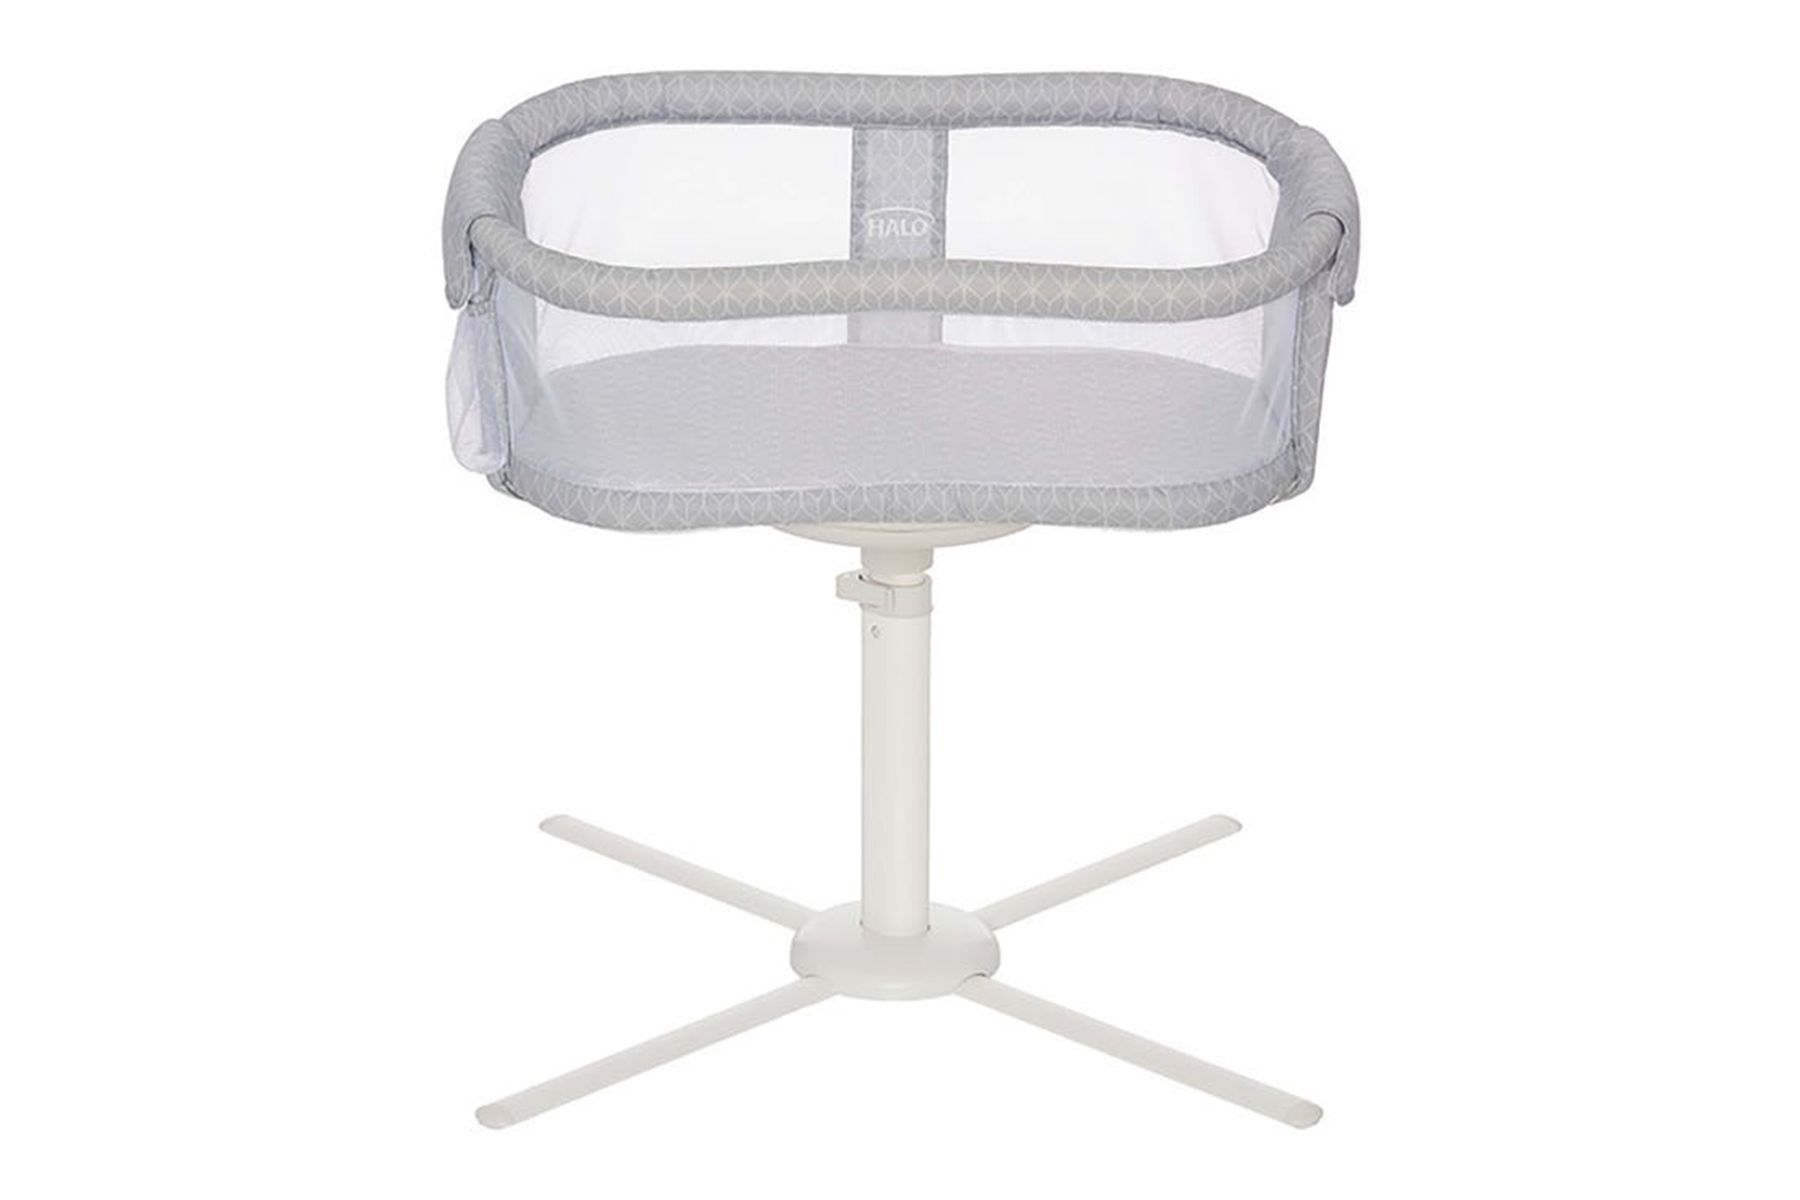 8 Best Baby Bassinets for Safe Sleeping in 2022 - Bassinet Reviews